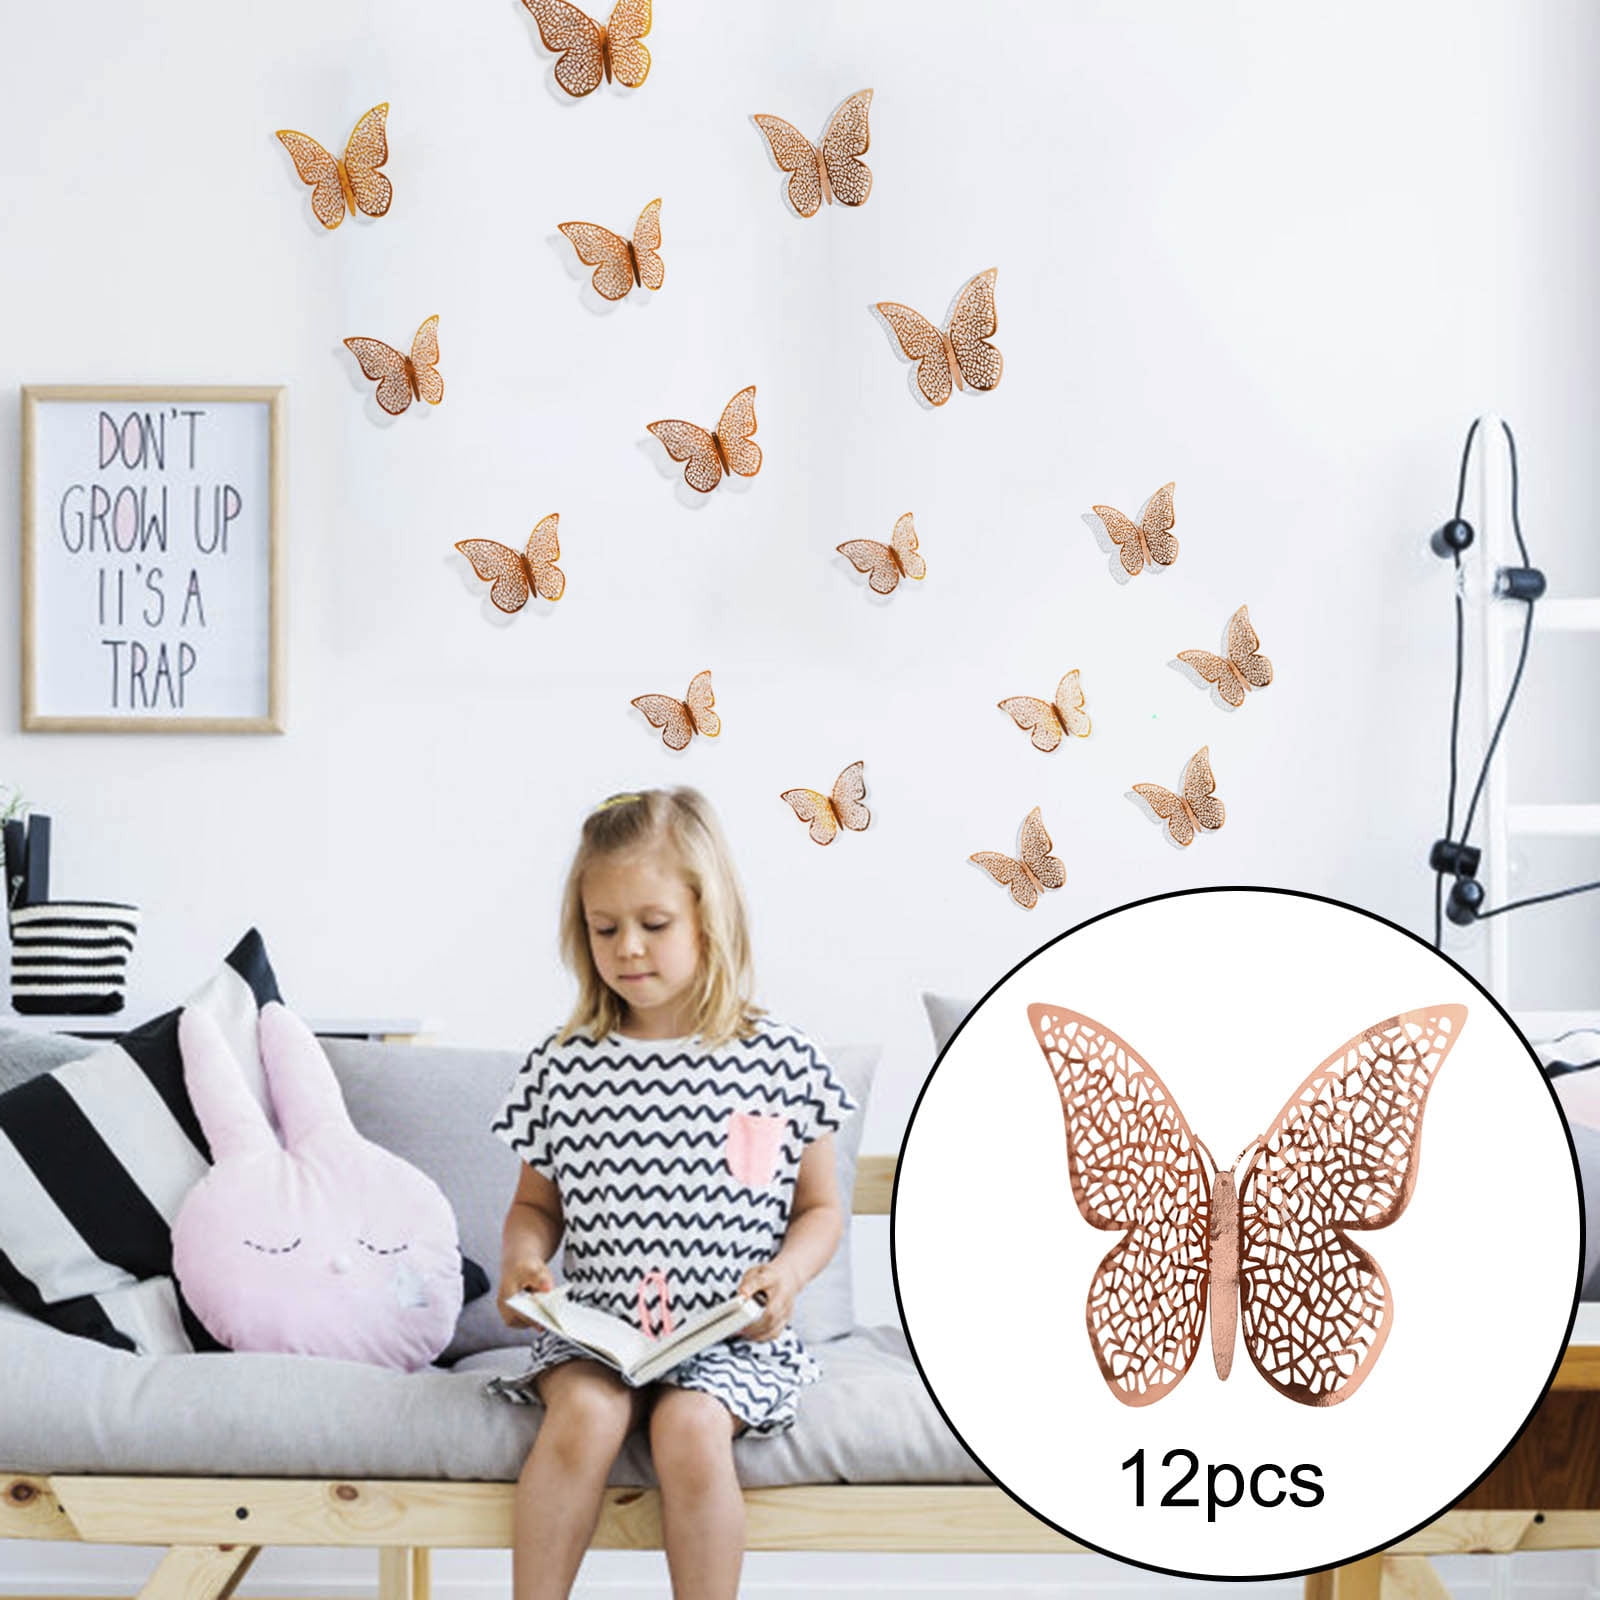 Details about   12pcs DIY 3D Hollow Butterfly Wall Sticker for Home Decoration Gold & Silver 